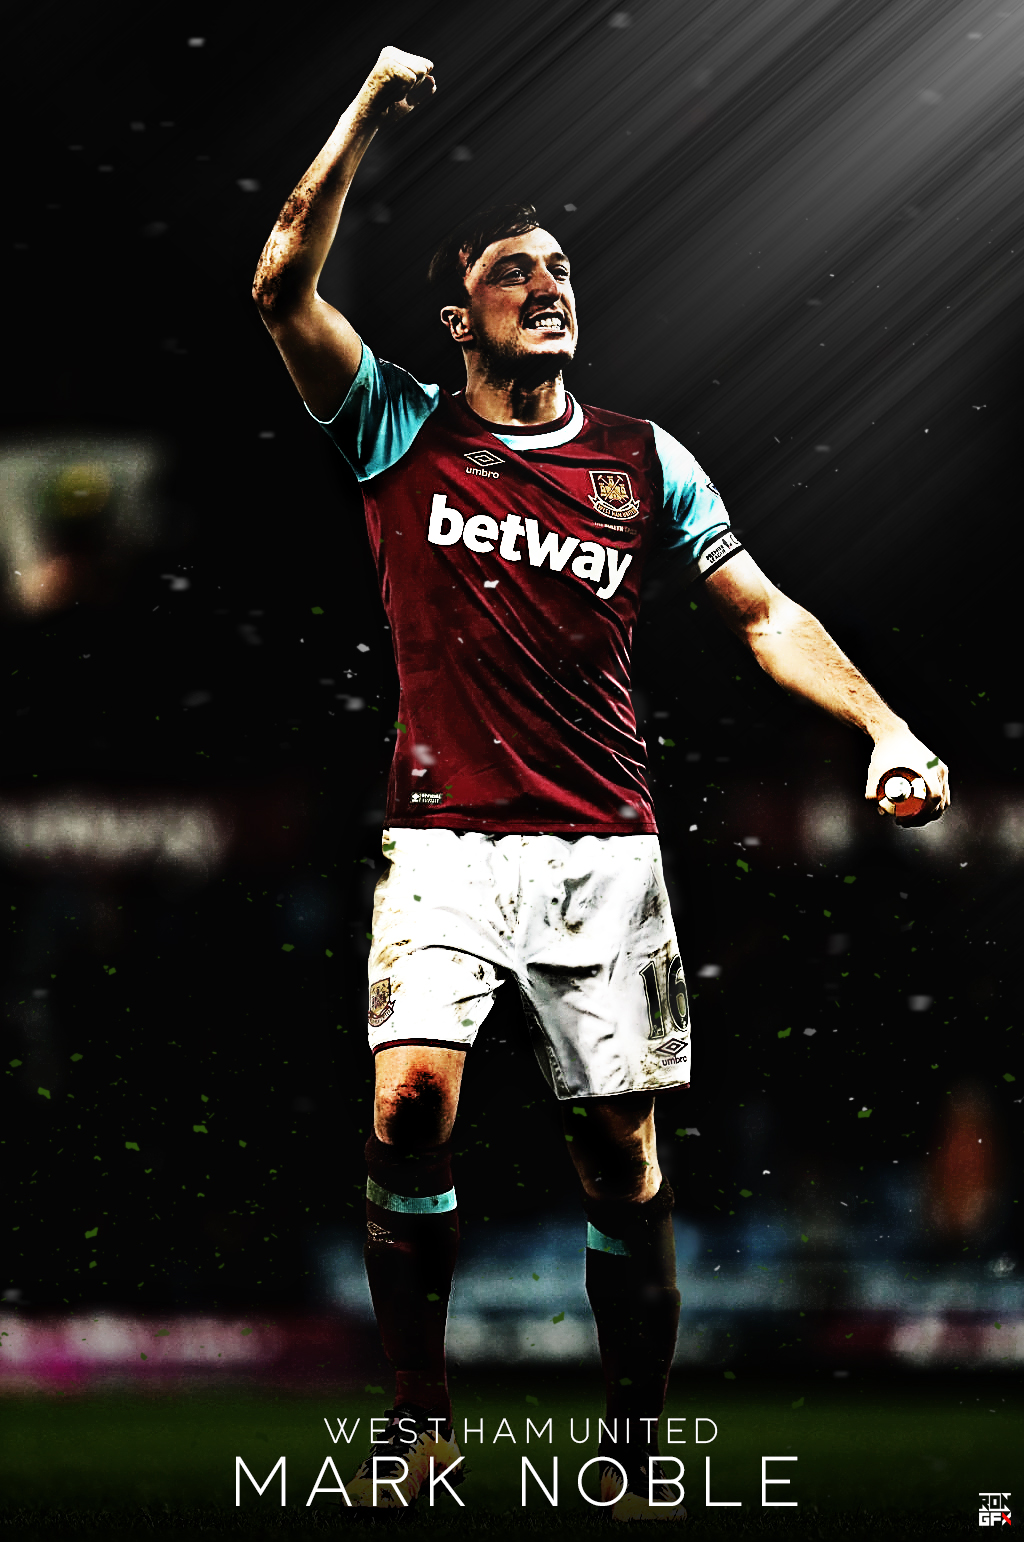 Mark noble wallpaper hd by ropn on